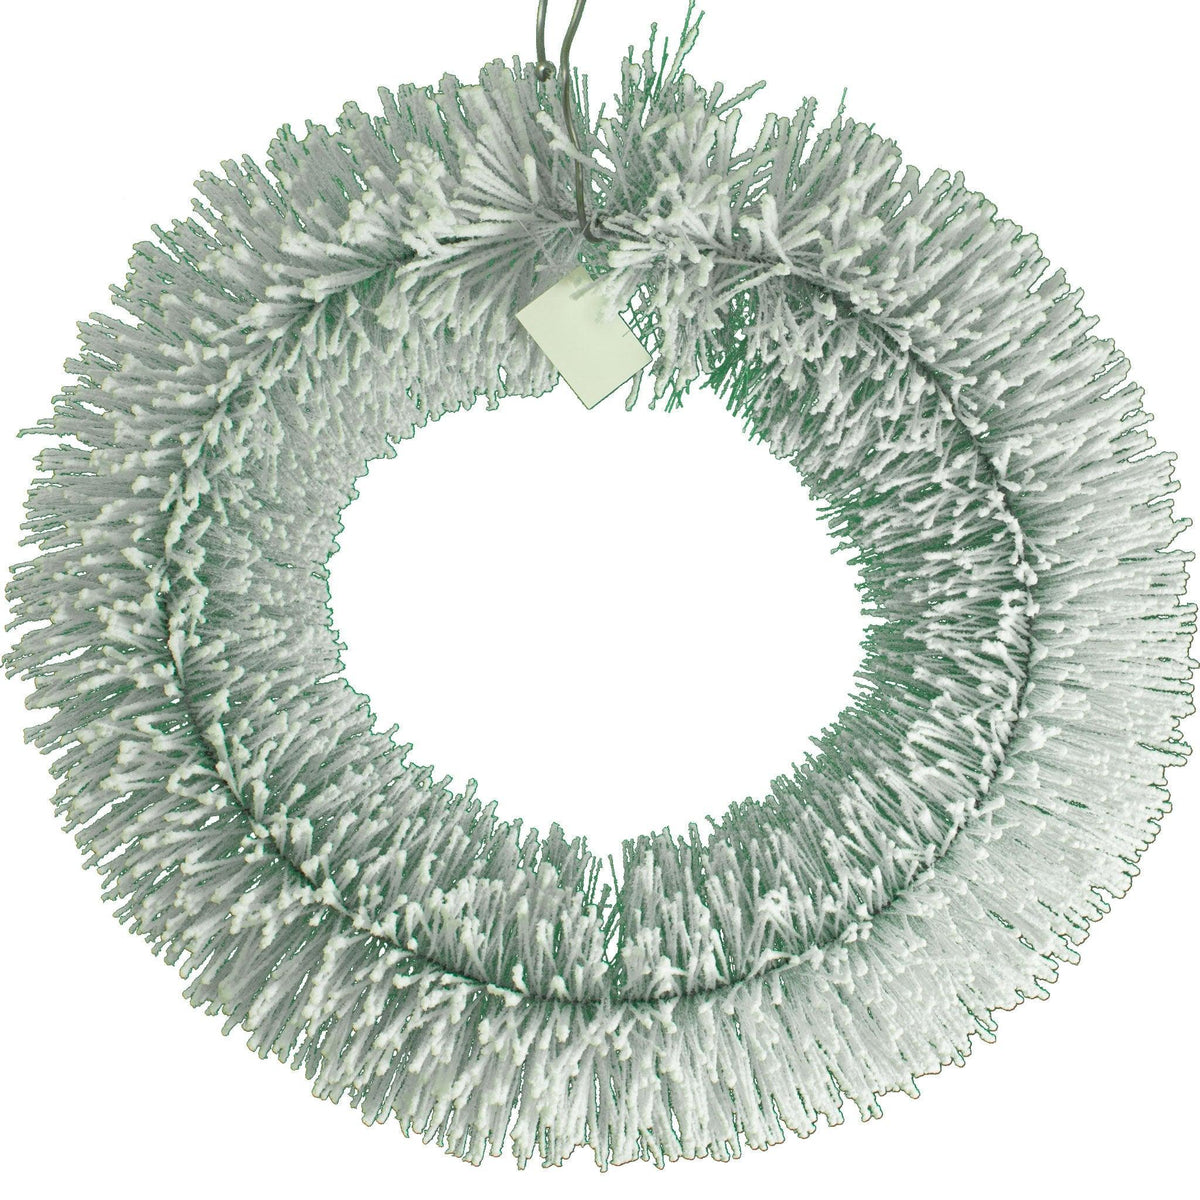 Introducing Lee Display's brand new Vintage Flocked Pine Needle Christmas Wreath!    Decorative 20in Diameter door hanging wreaths made by Lee Display.  Made with Green Pine Needle Brush and covered in white flocking, this wreath is perfect for your rustic holiday decor.   On sale at leedisplay.com